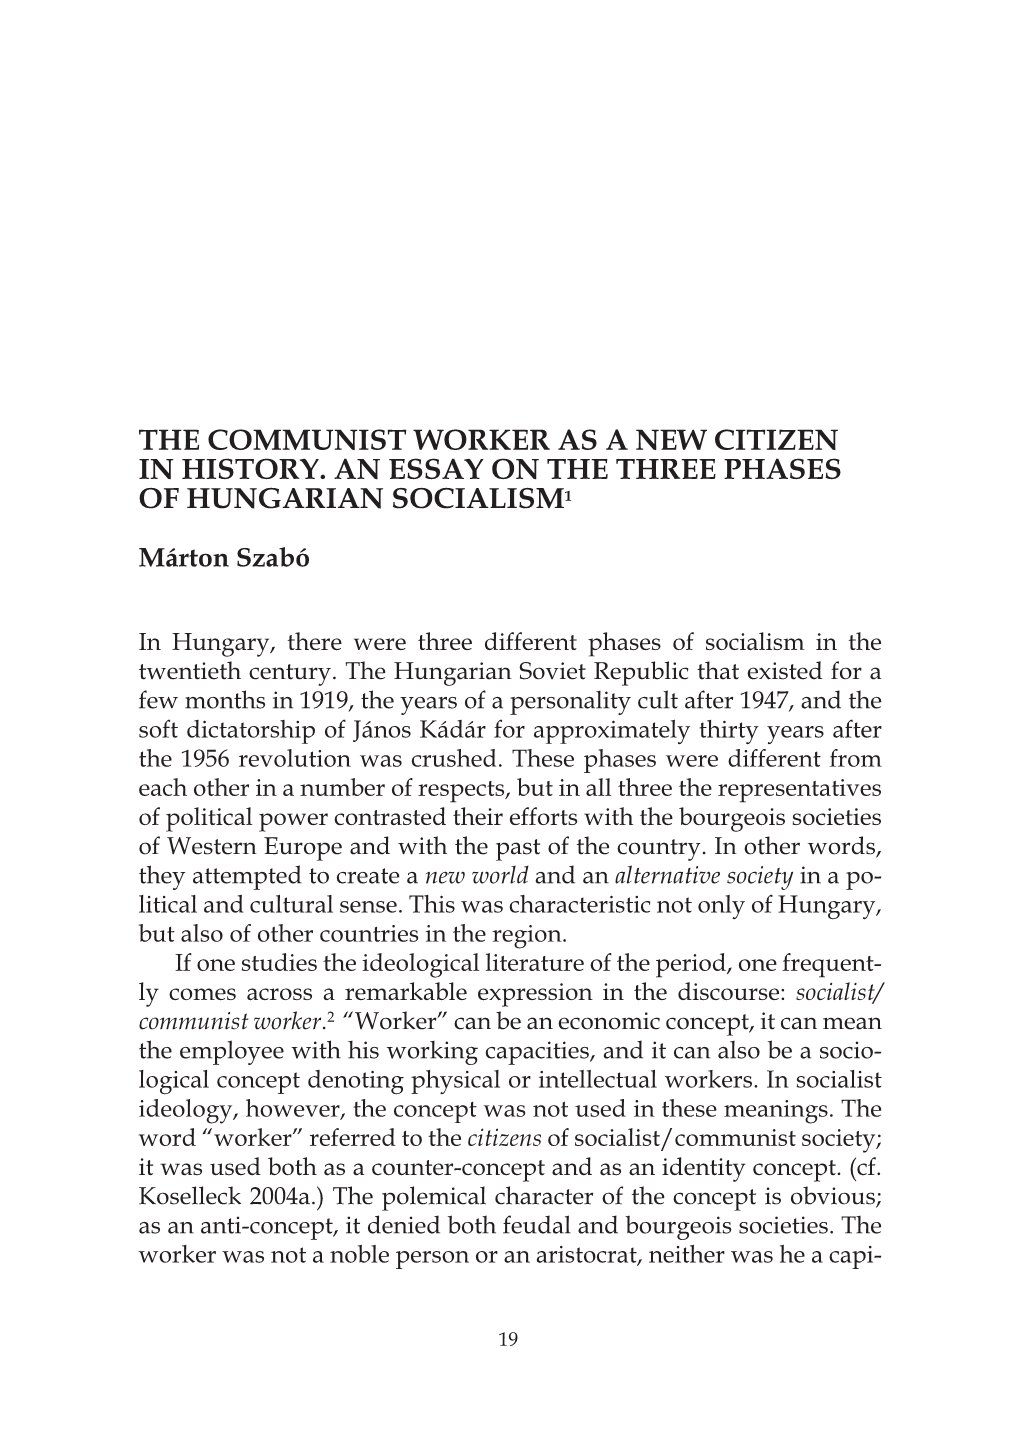 The Communist Worker As a New Citizen in History. an Essay on the Three Phases of Hungarian Socialism1